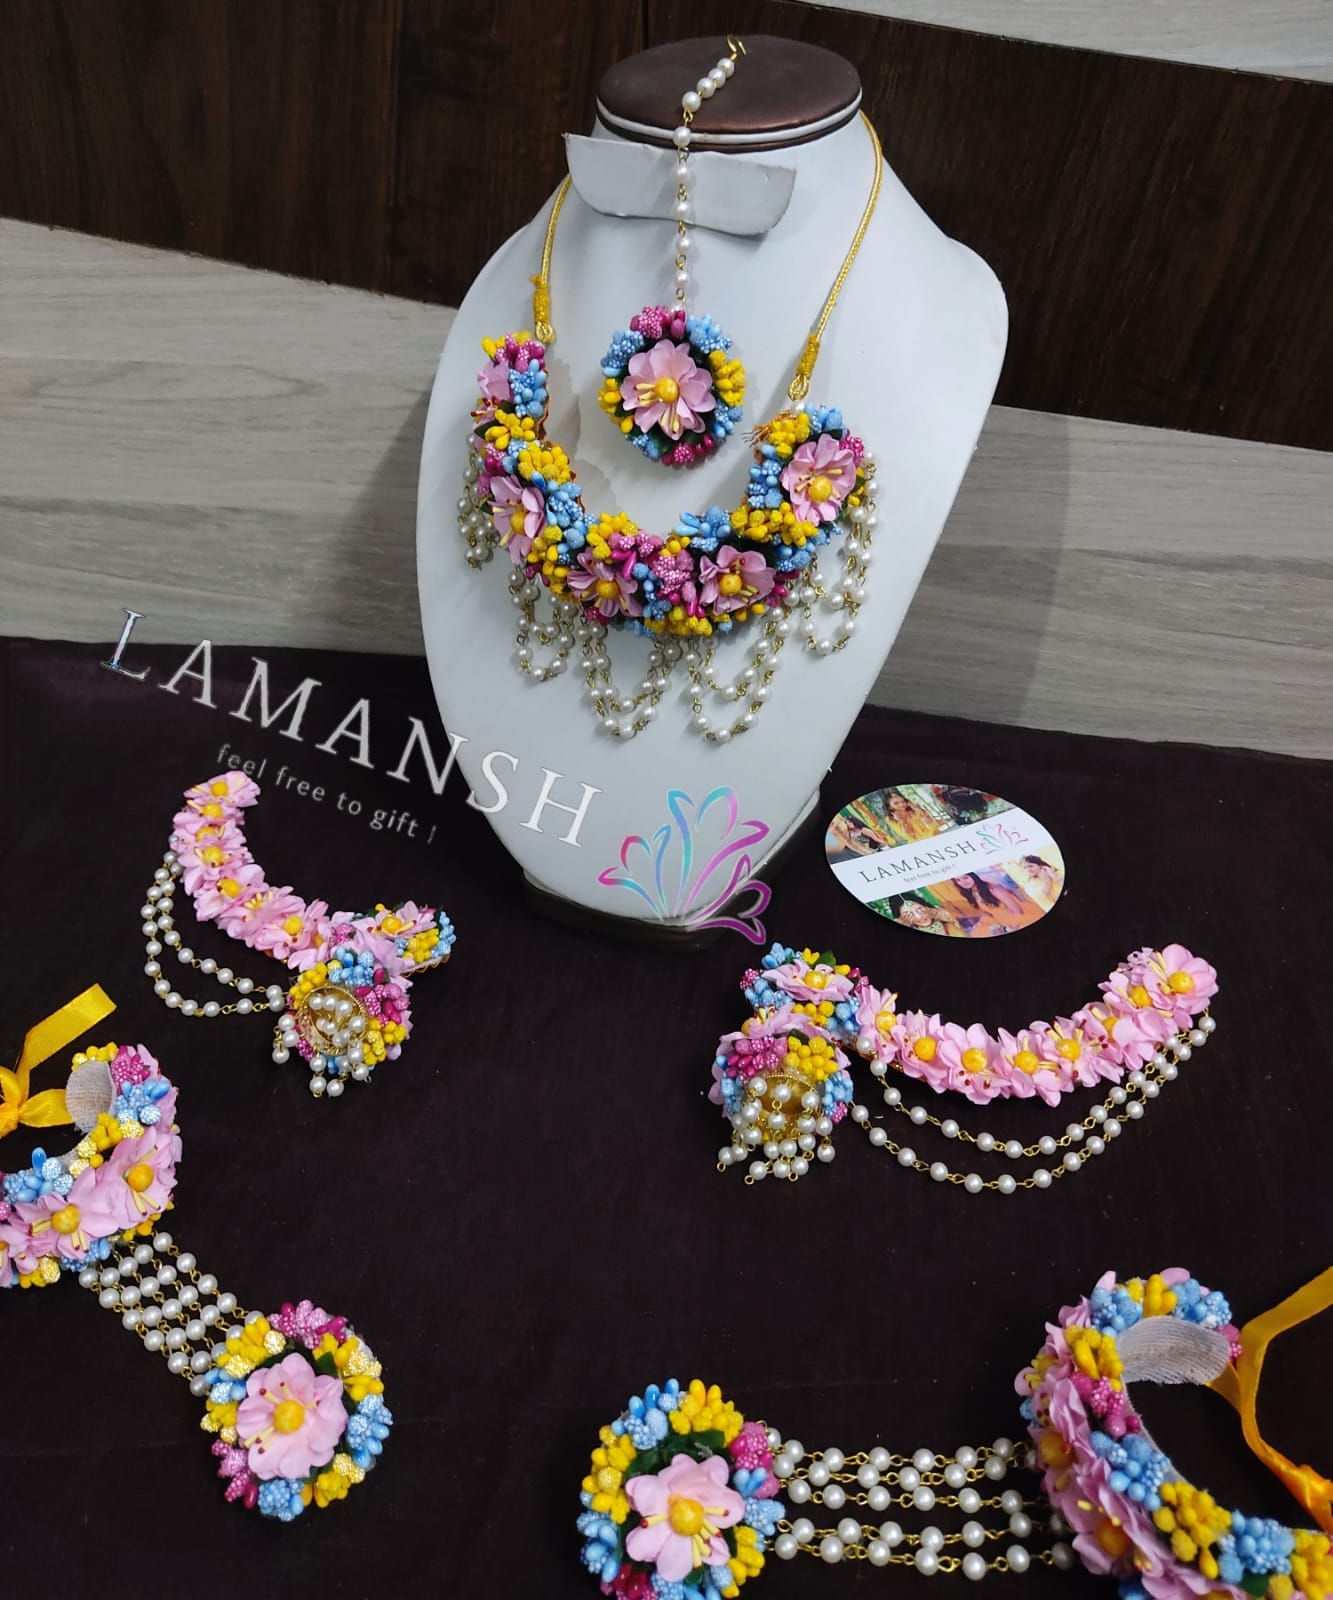 New Jaipur Handicraft latest floral sets Pink- Blue-Yellow / Free Size / Bridal Look Lamansh® 🌺 Floral Jewellery Set with extended clips in the Earrings / Flower Bridal set